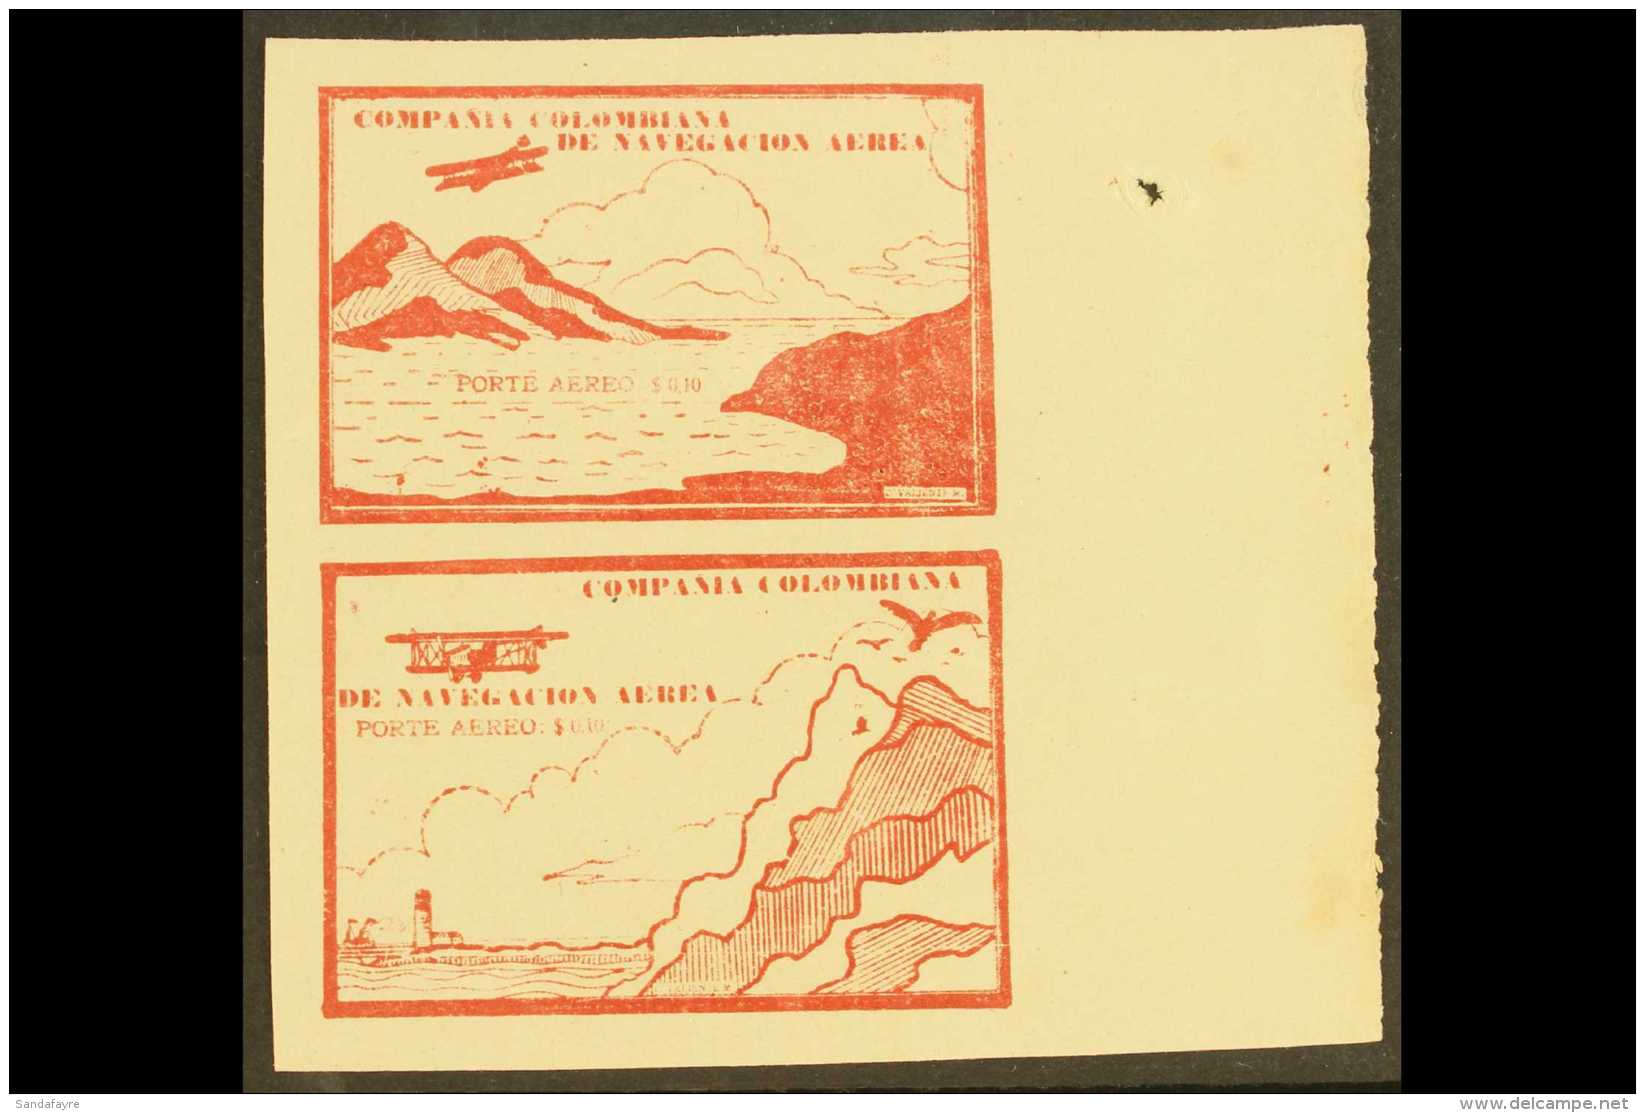 PRIVATE AIRS - COMPANIA COLOMBIANA DE NAVEGACION AREA  1920 (Oct) 10c Brown-red "Sea And Mountains" And "Cliffs... - Colombia